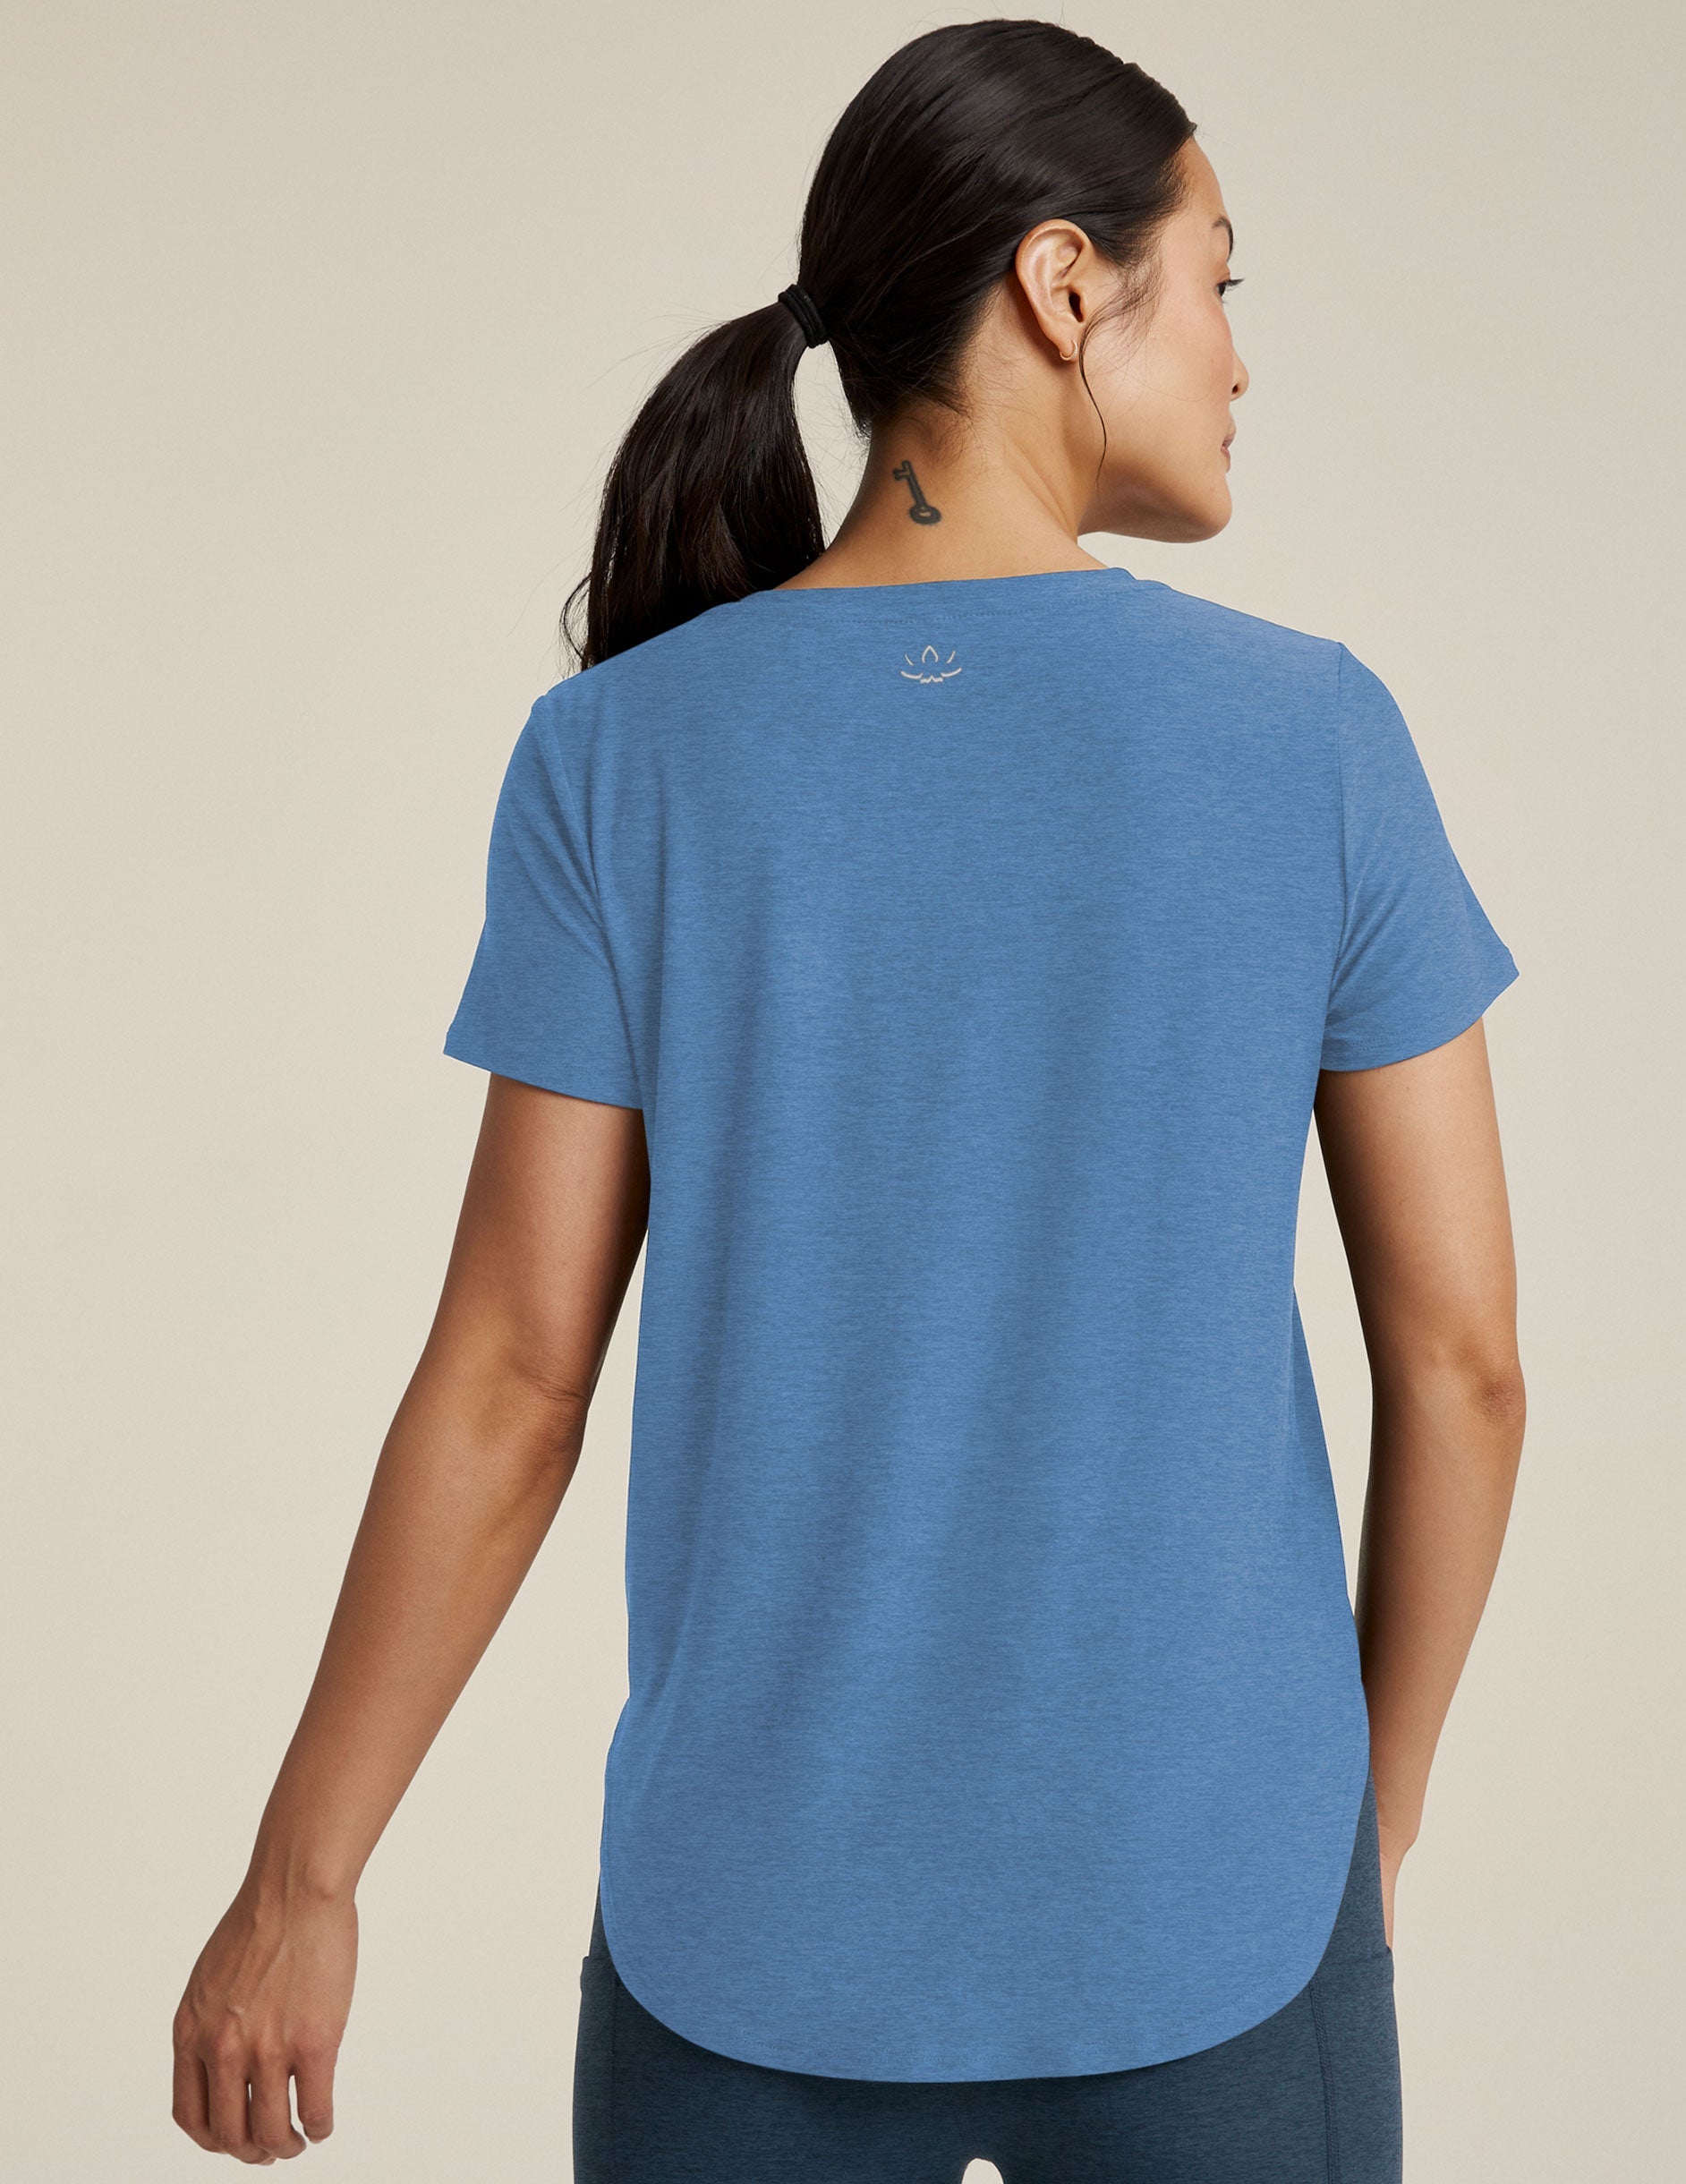 BEYOND YOGA FEATHERWEIGHT ON THE DOWN LOW TEE SKY BLUE HEATHER